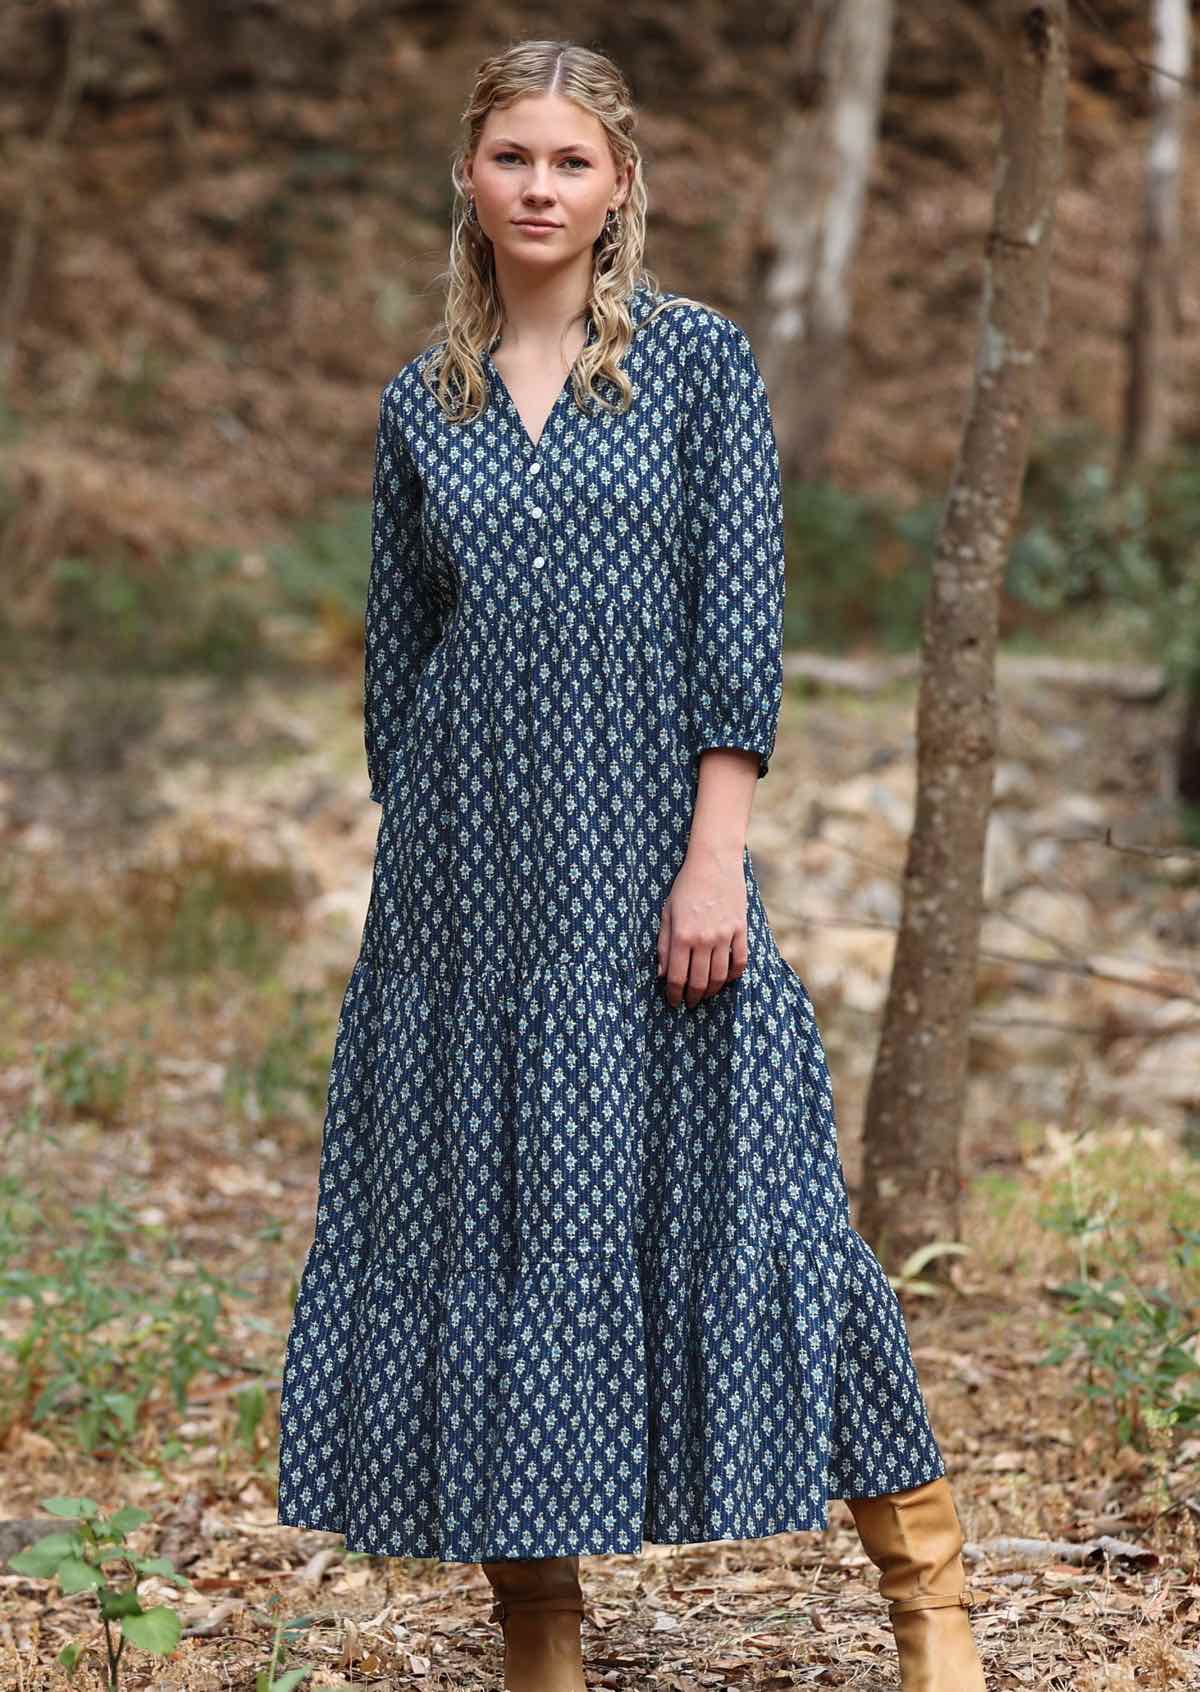 Maxi dress with 3/4 sleeves, buttoned bodice and pockets